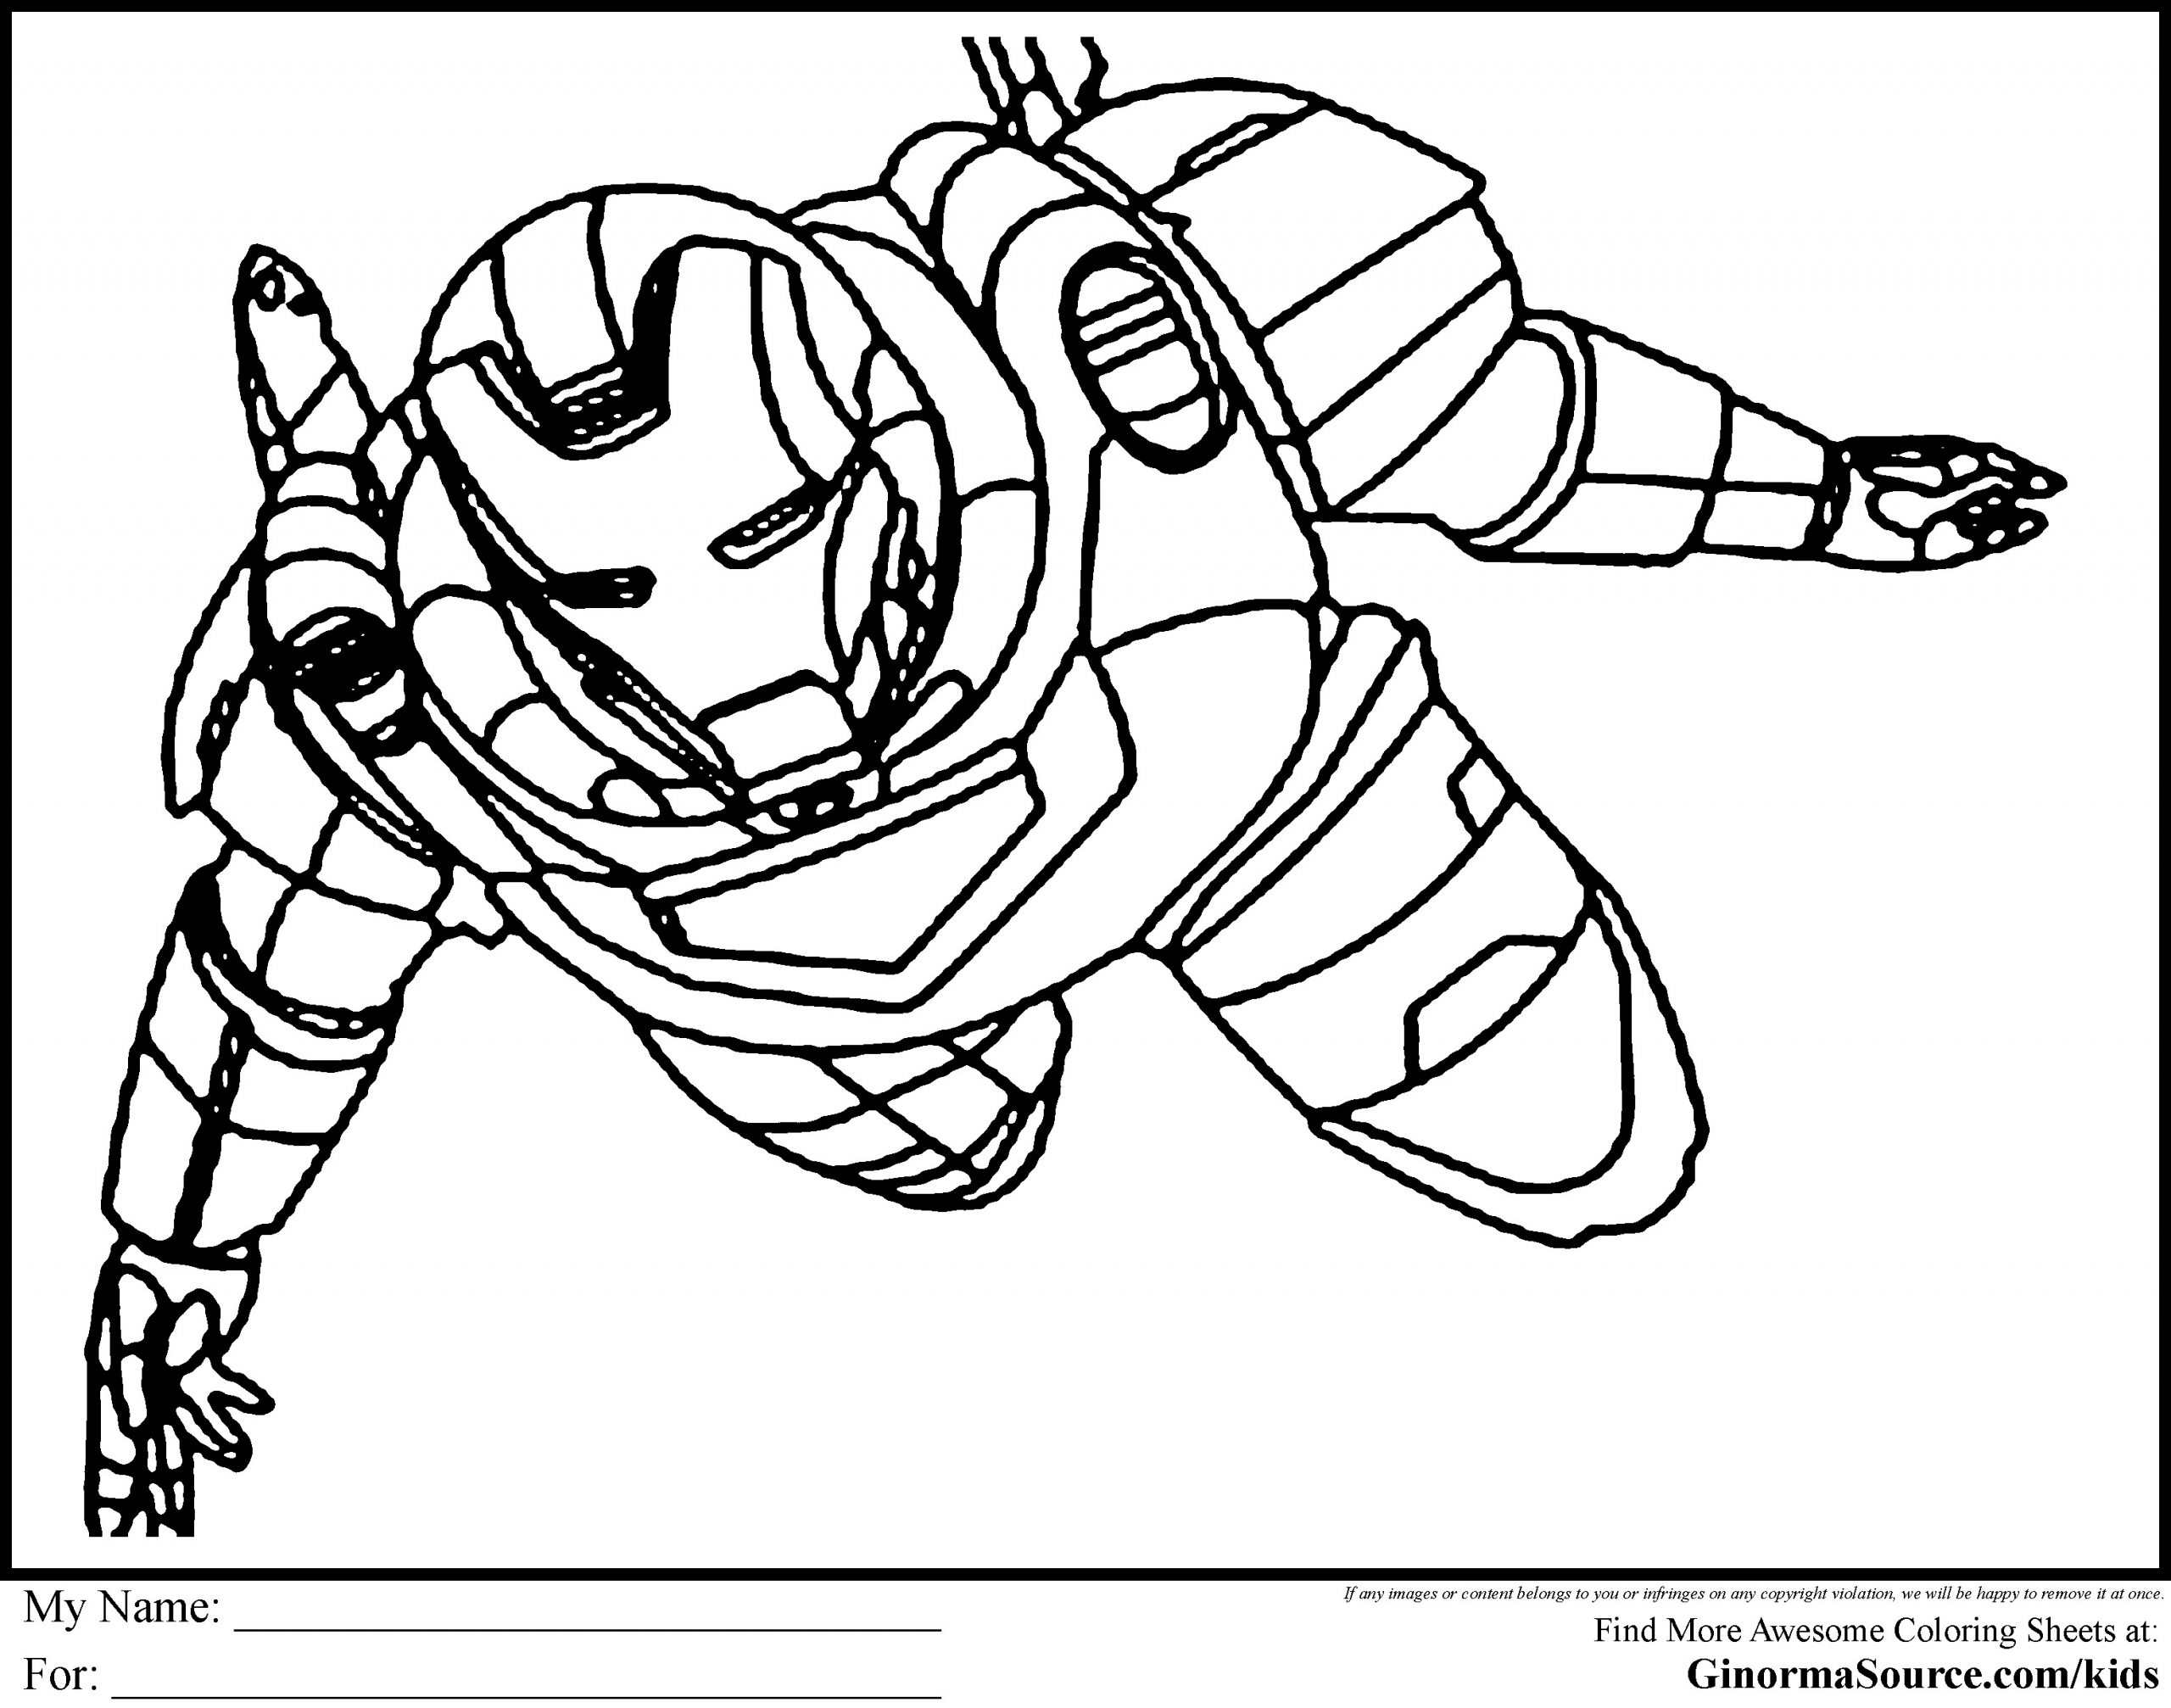 Free Printable Superhero Coloring Pages
 Superhero Coloring Pages Pdf Coloring Home